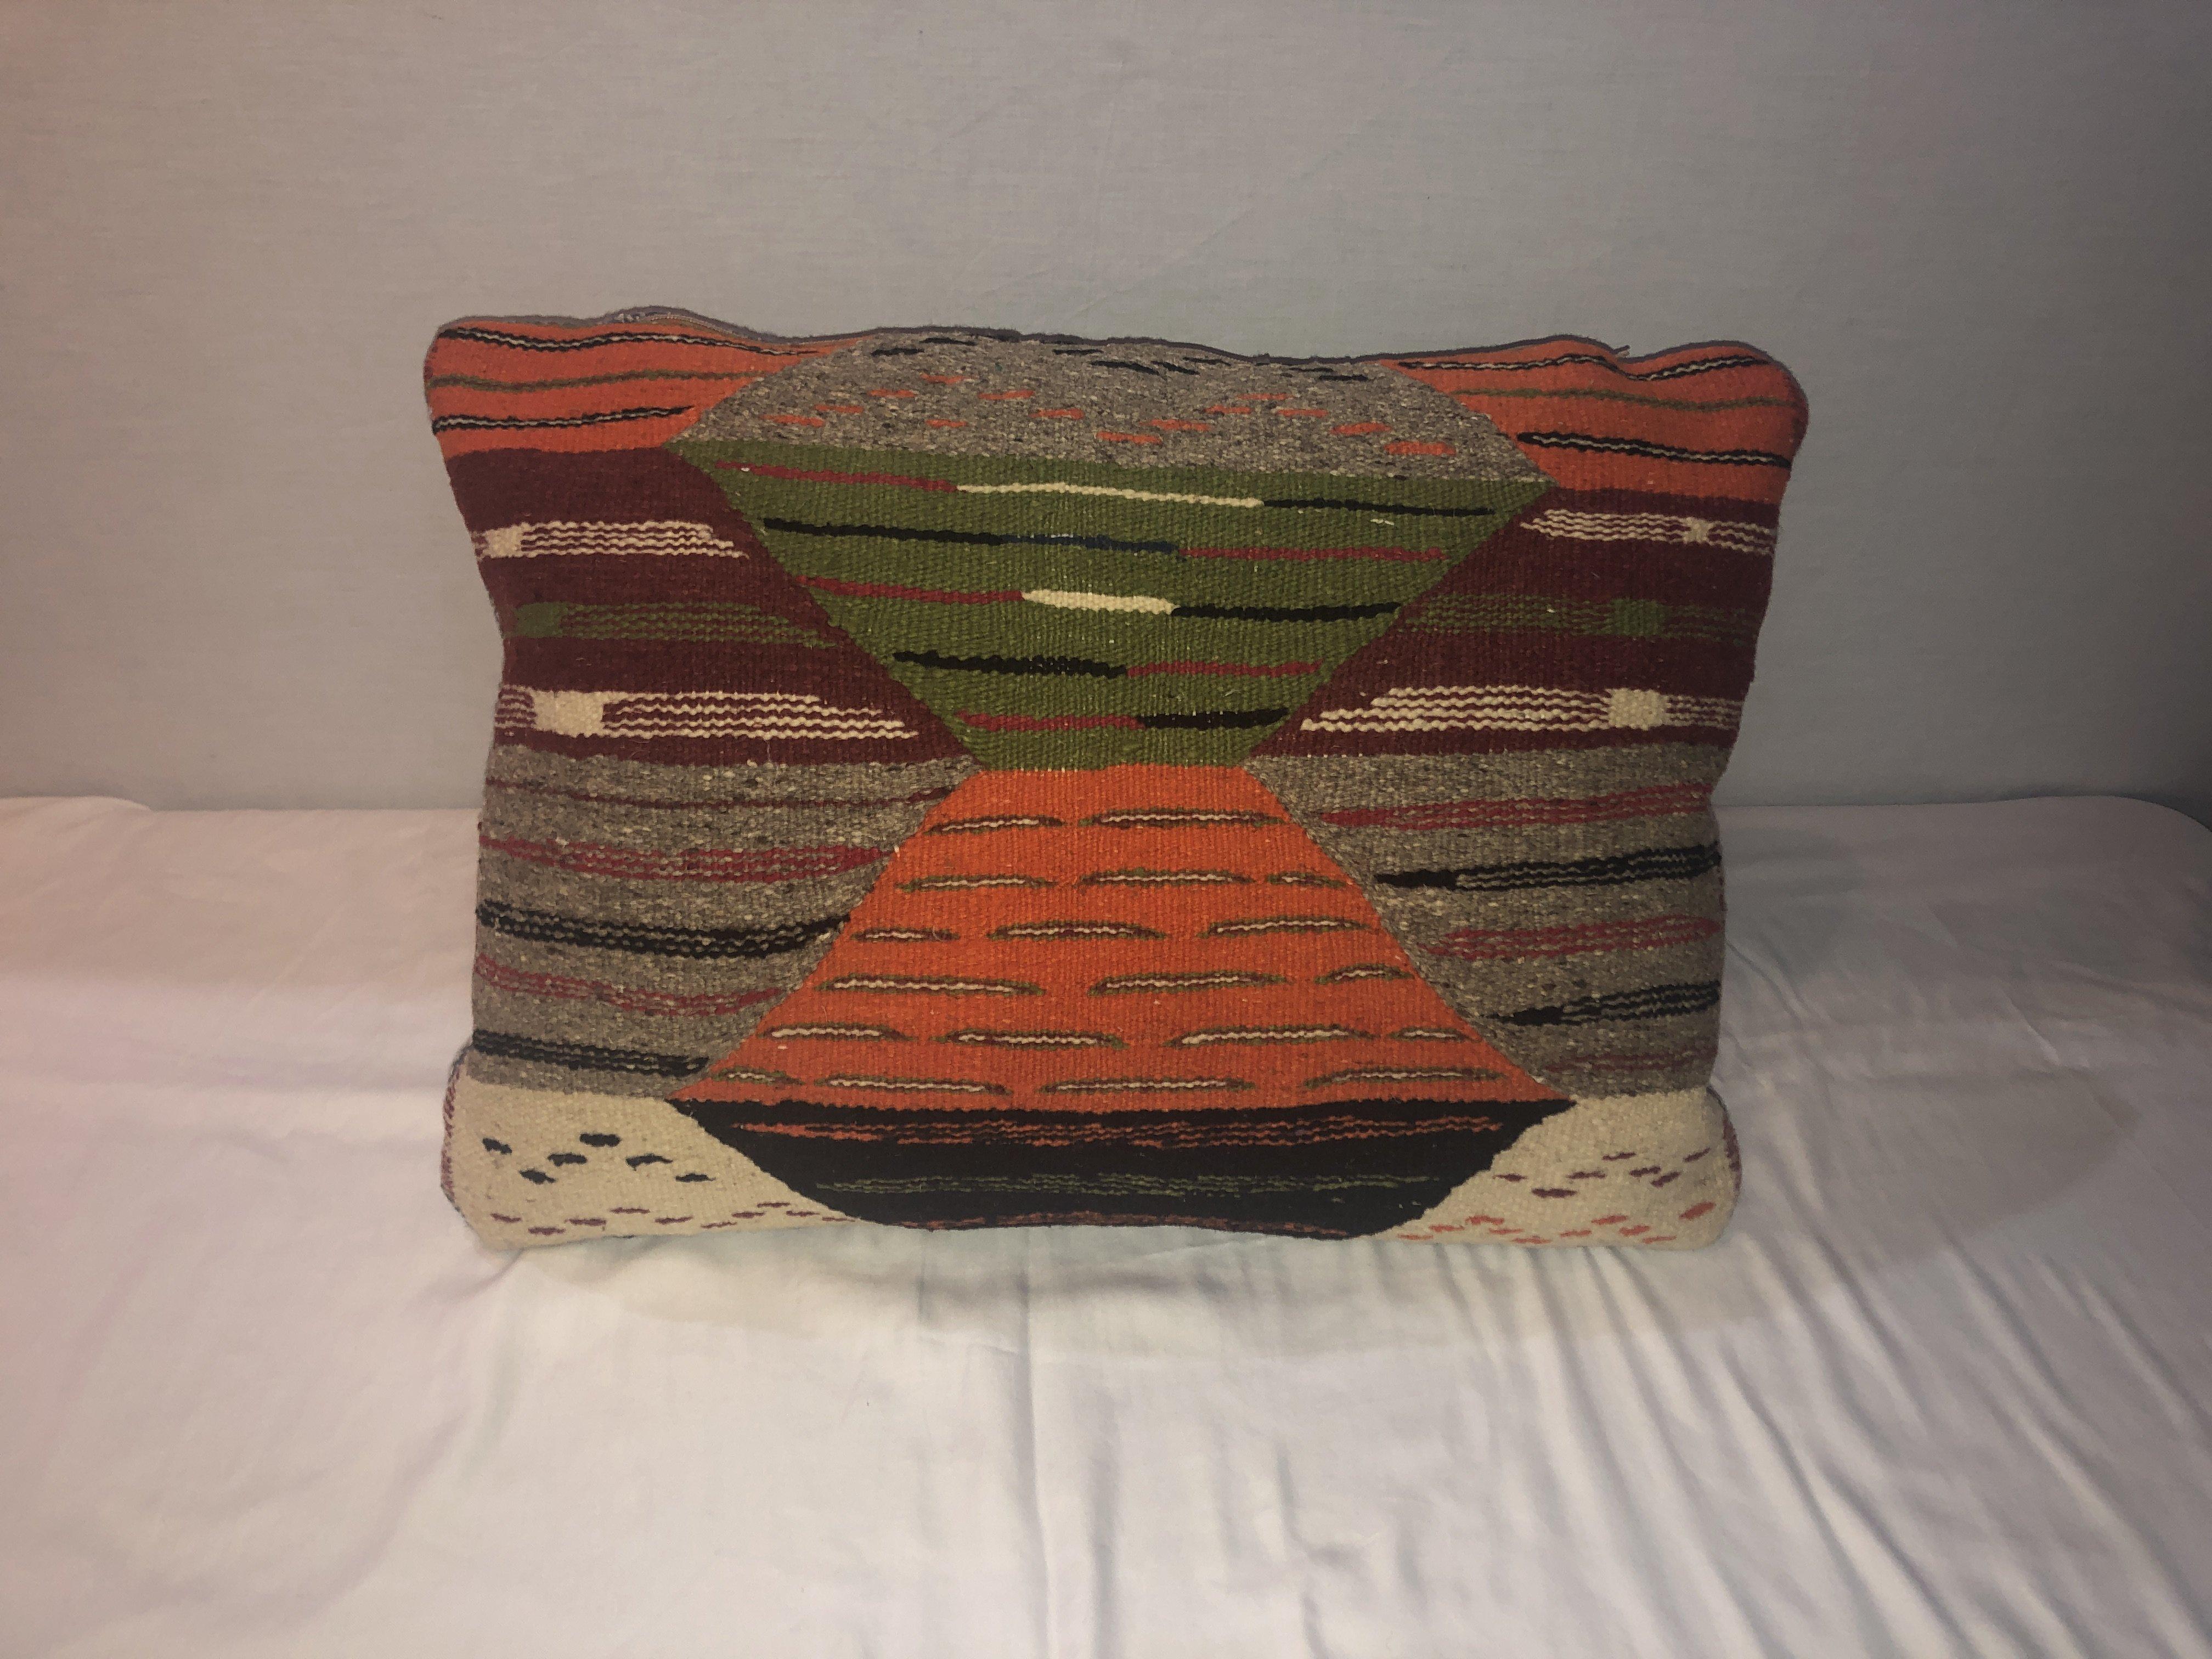 A stunning one-of-a-kind Kilim pillow, custom made from a vintage Moroccan wool rug handwoven in the Atlas Mountains in Morocco by Berber women artisans. This beautiful Kilim pillow will look great in any interior style such as Bohemian, Classic or